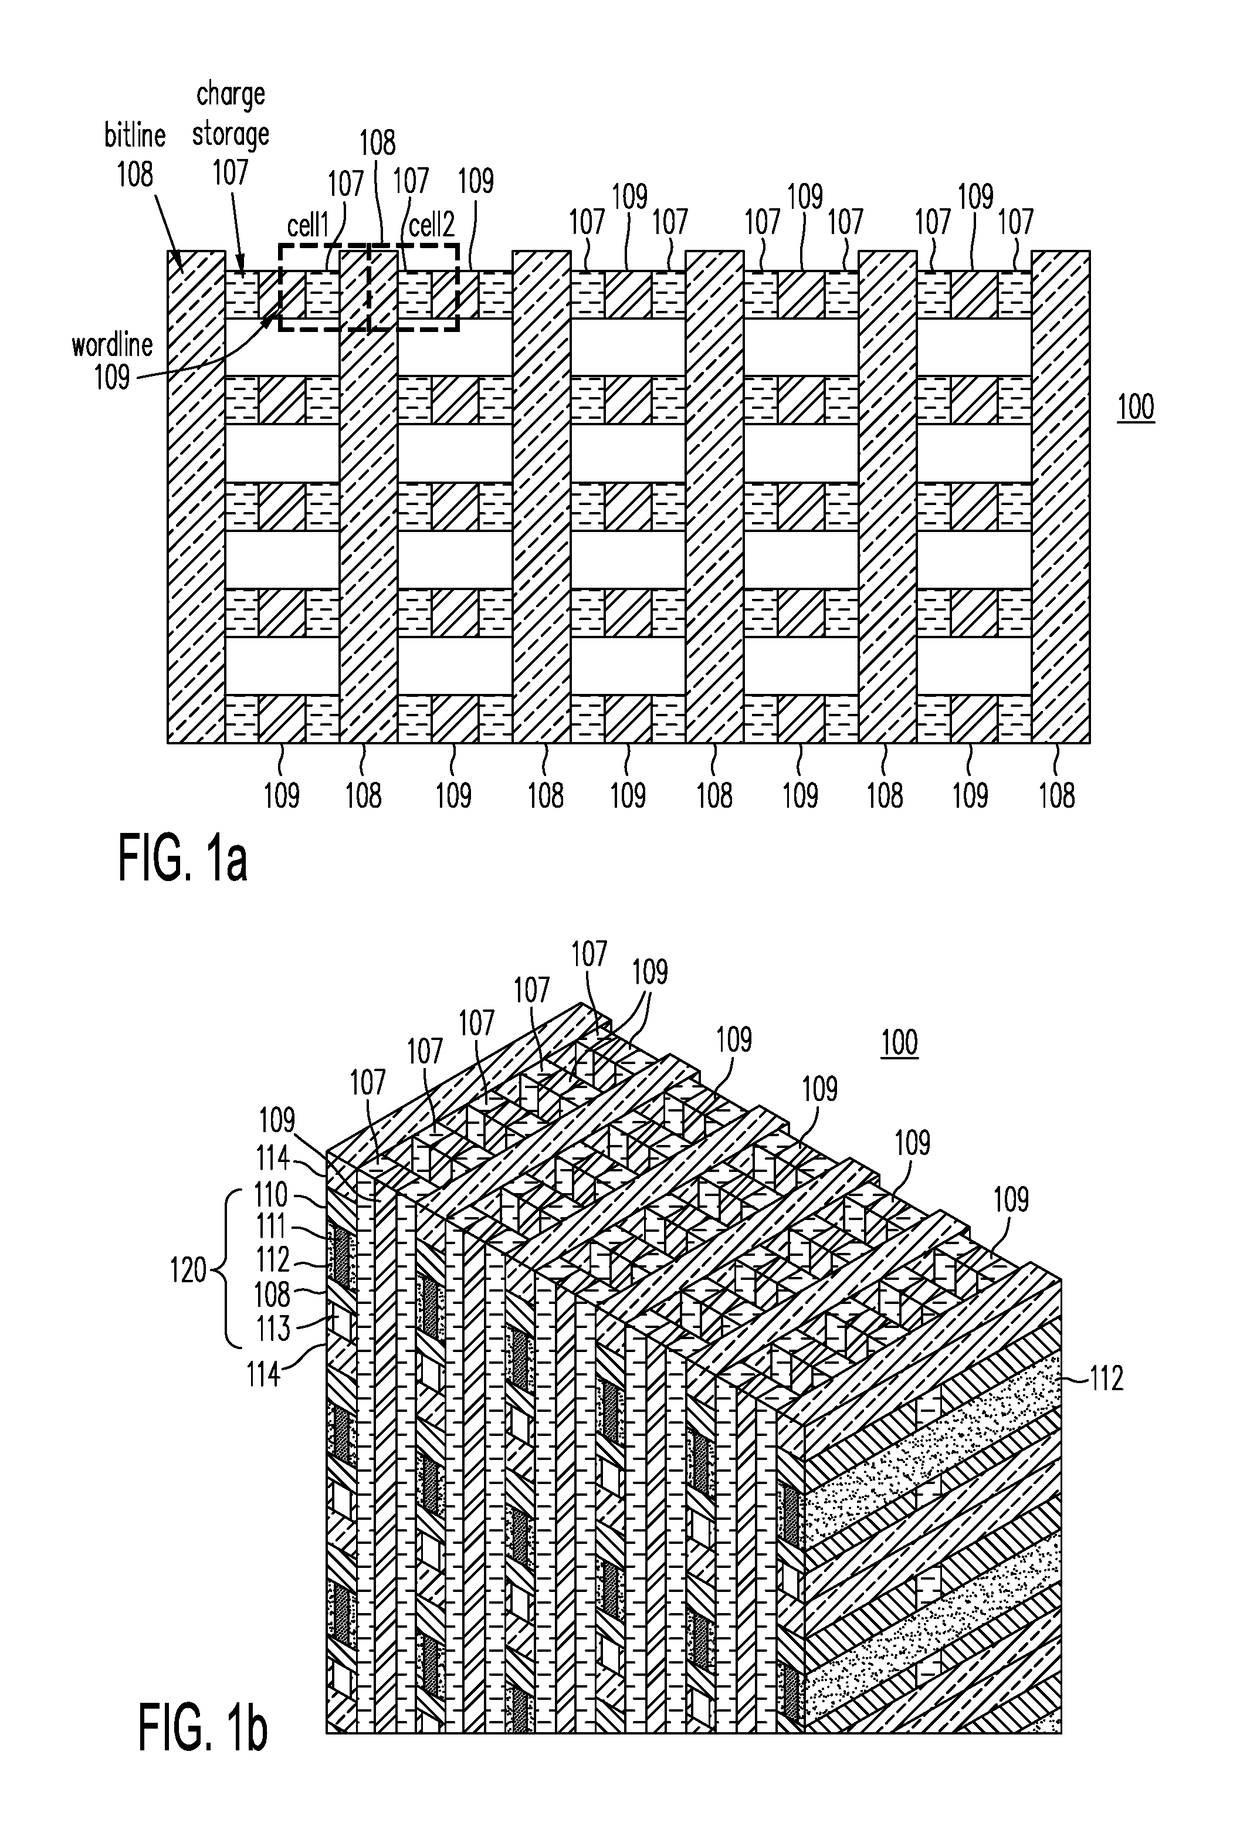 Staggered Word Line Architecture for Reduced Disturb in 3-Dimensional NOR Memory Arrays